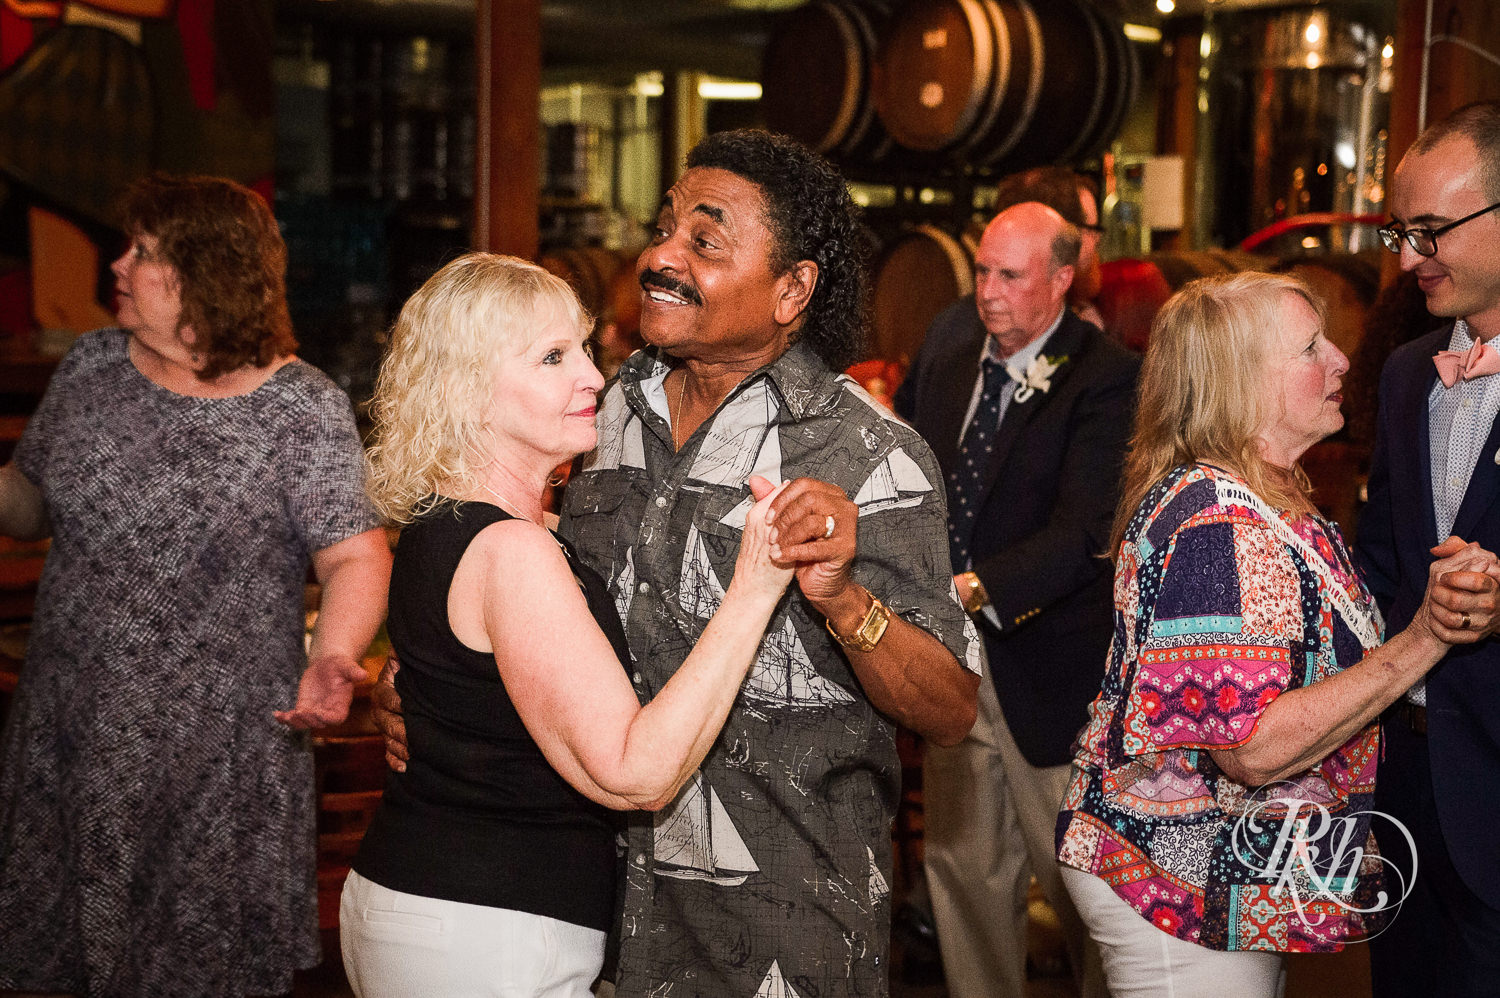 Guests dance during brewery wedding reception at 612 Brew in Minneapolis, Minnesota.